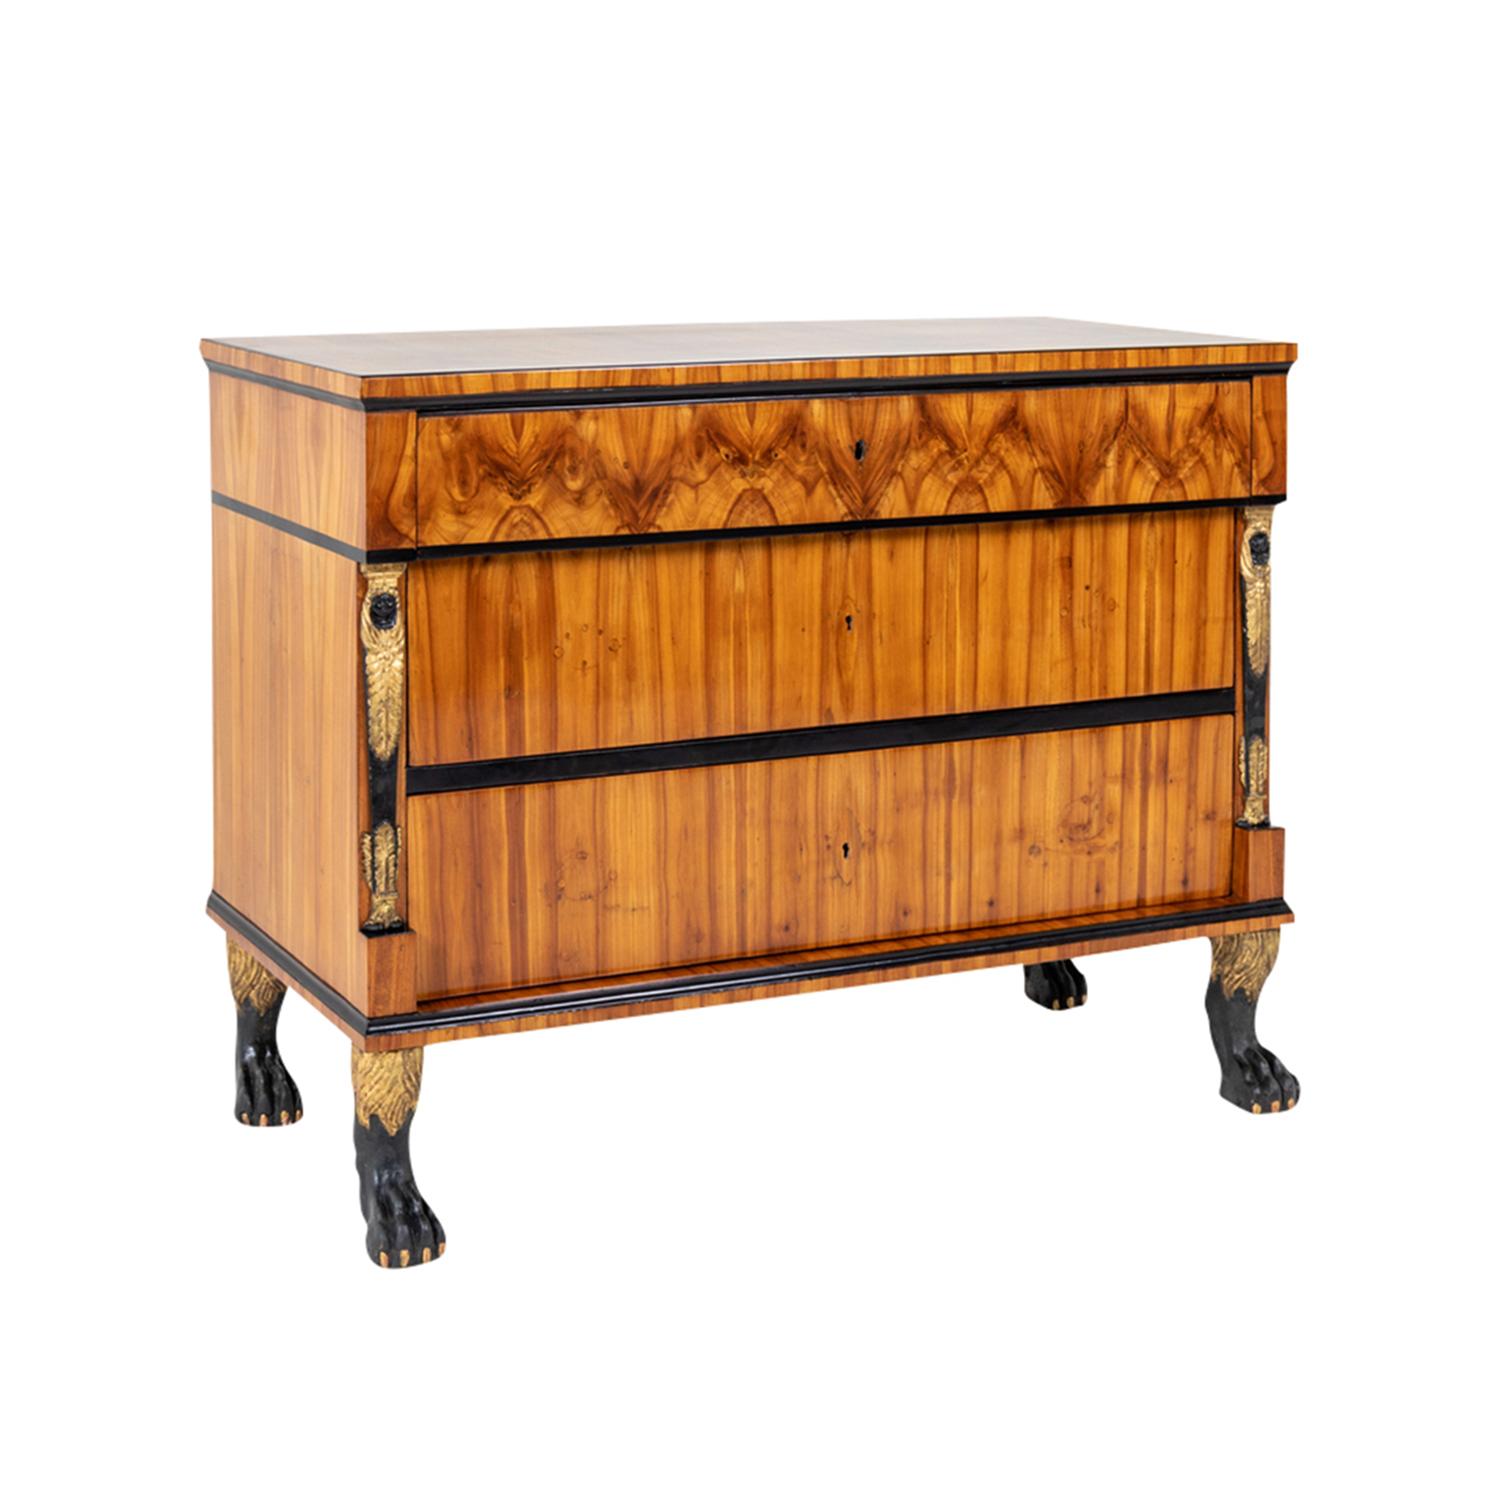 Hand-Carved 19th Century German Biedermeier Cherrywood Chest of Drawers - Antique Commode For Sale